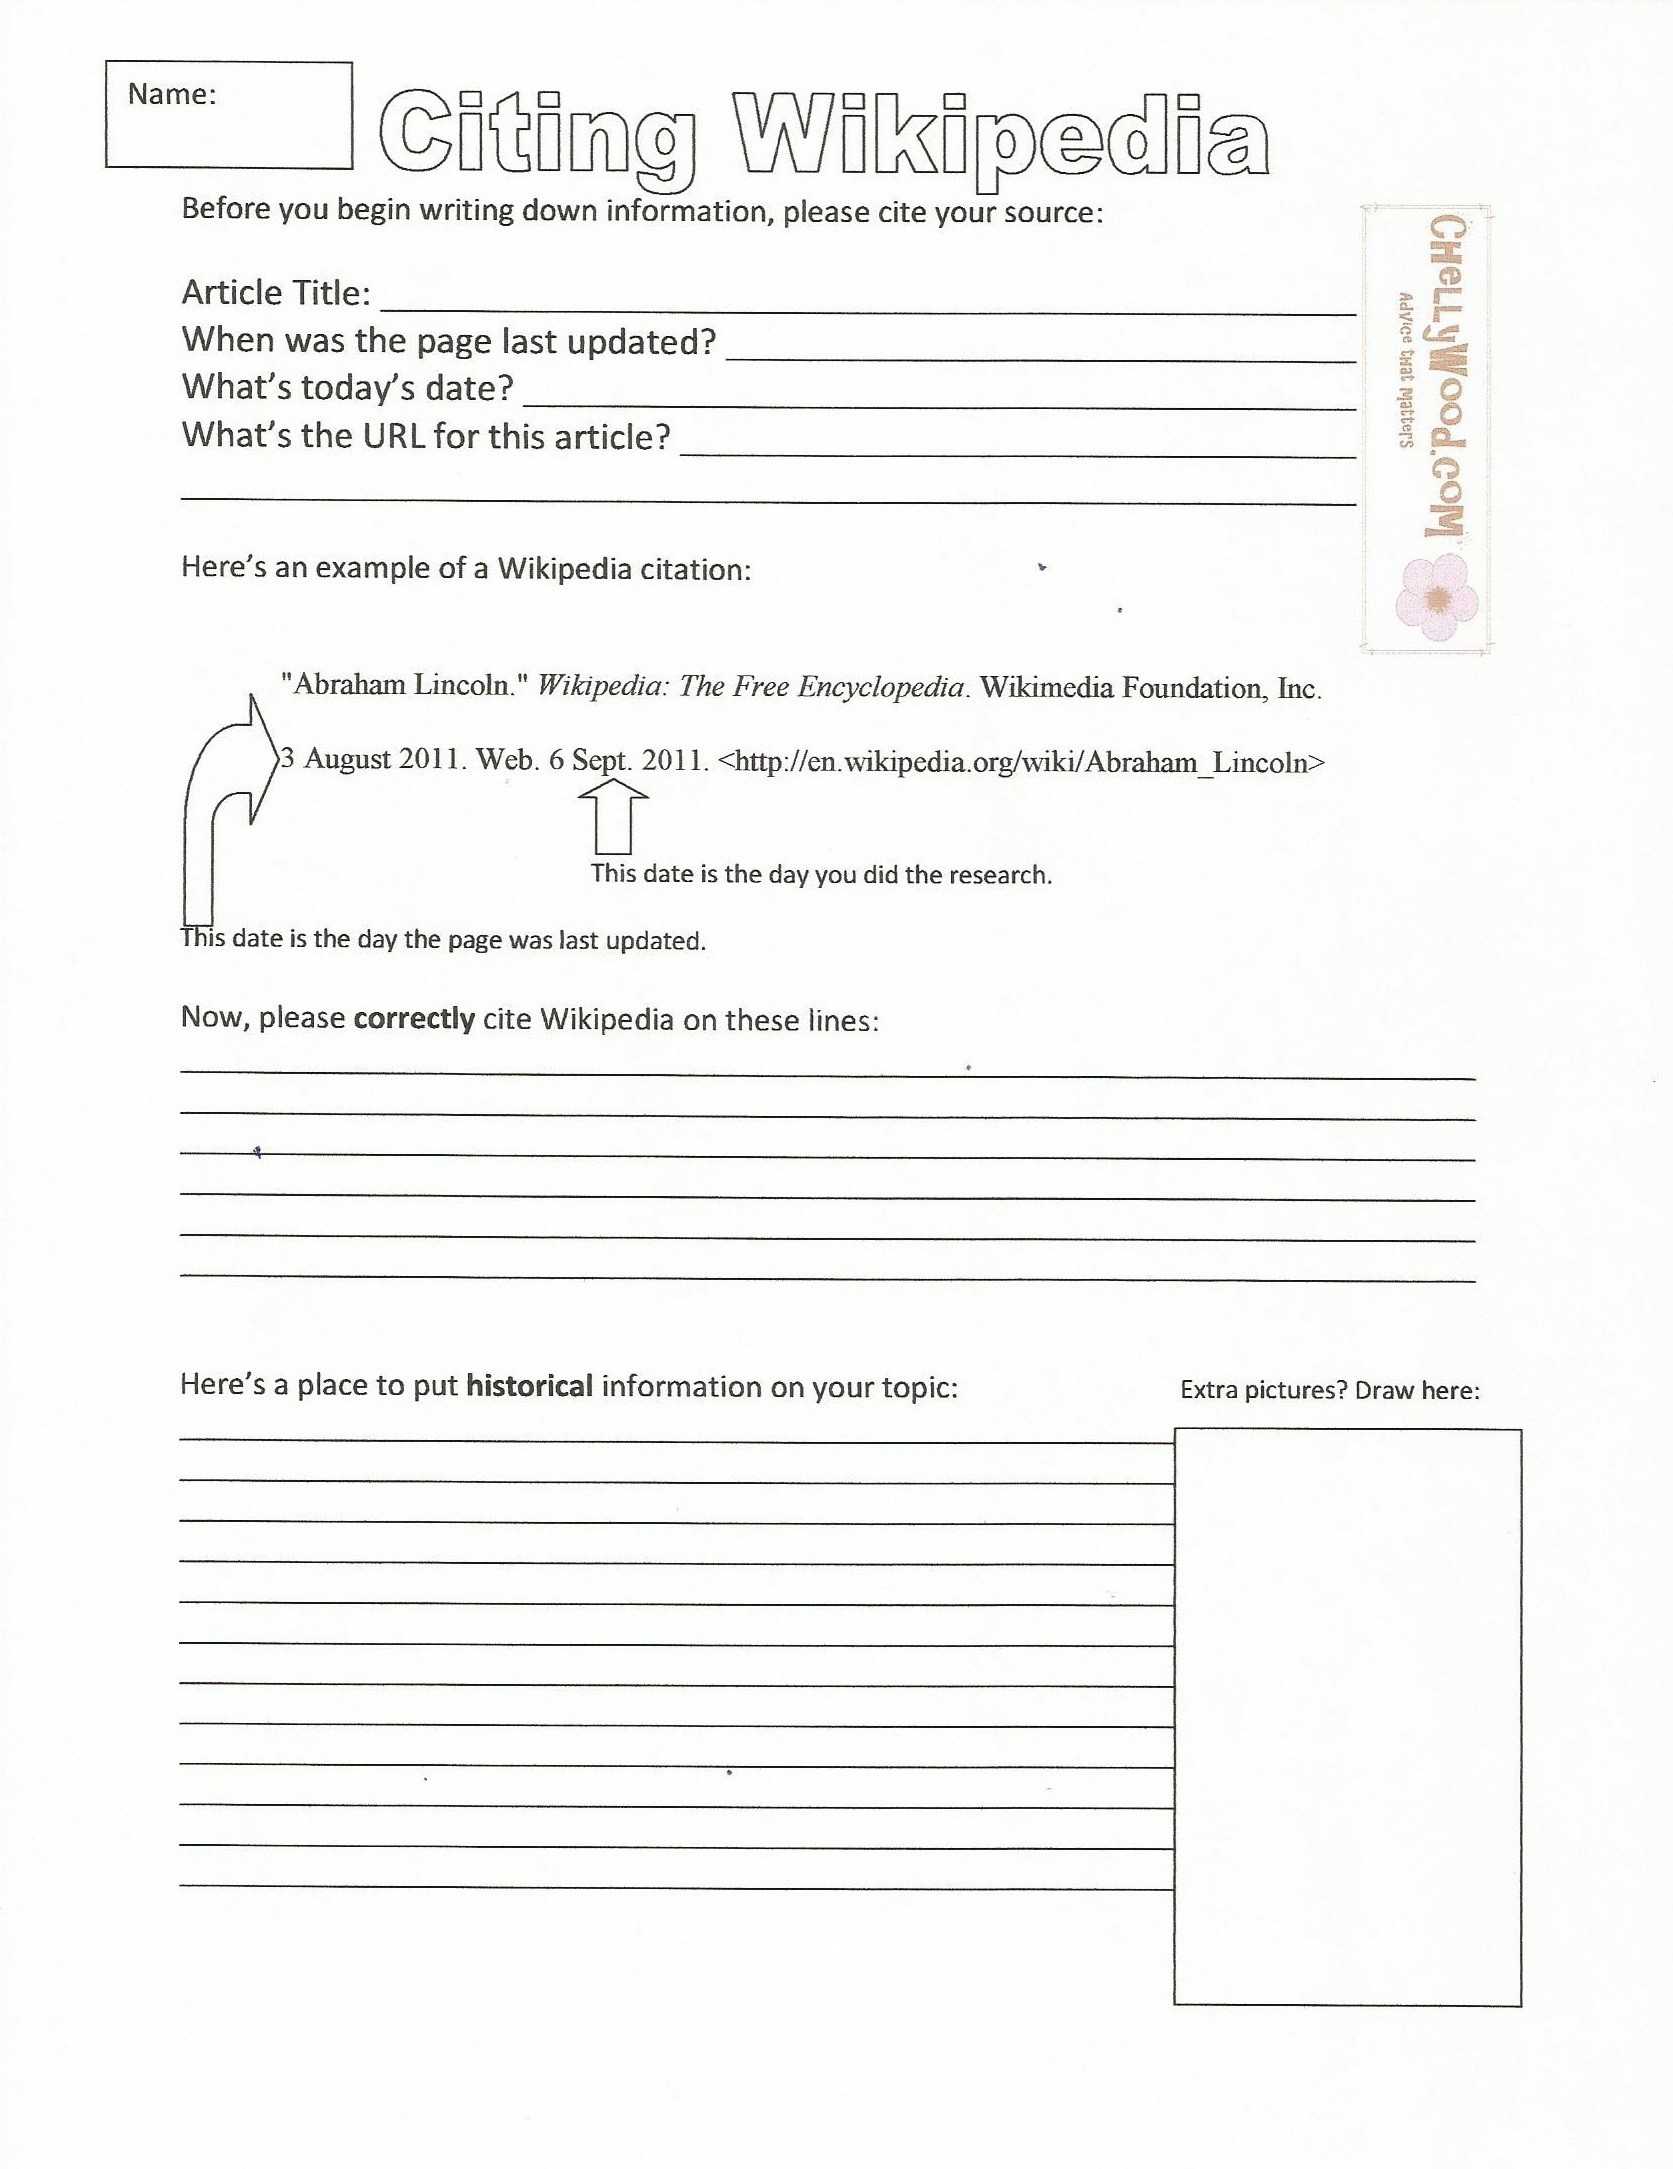 Food Web Worksheet Answers and Food Inc Worksheet with Answers Inspirationa Food Inc Worksheet